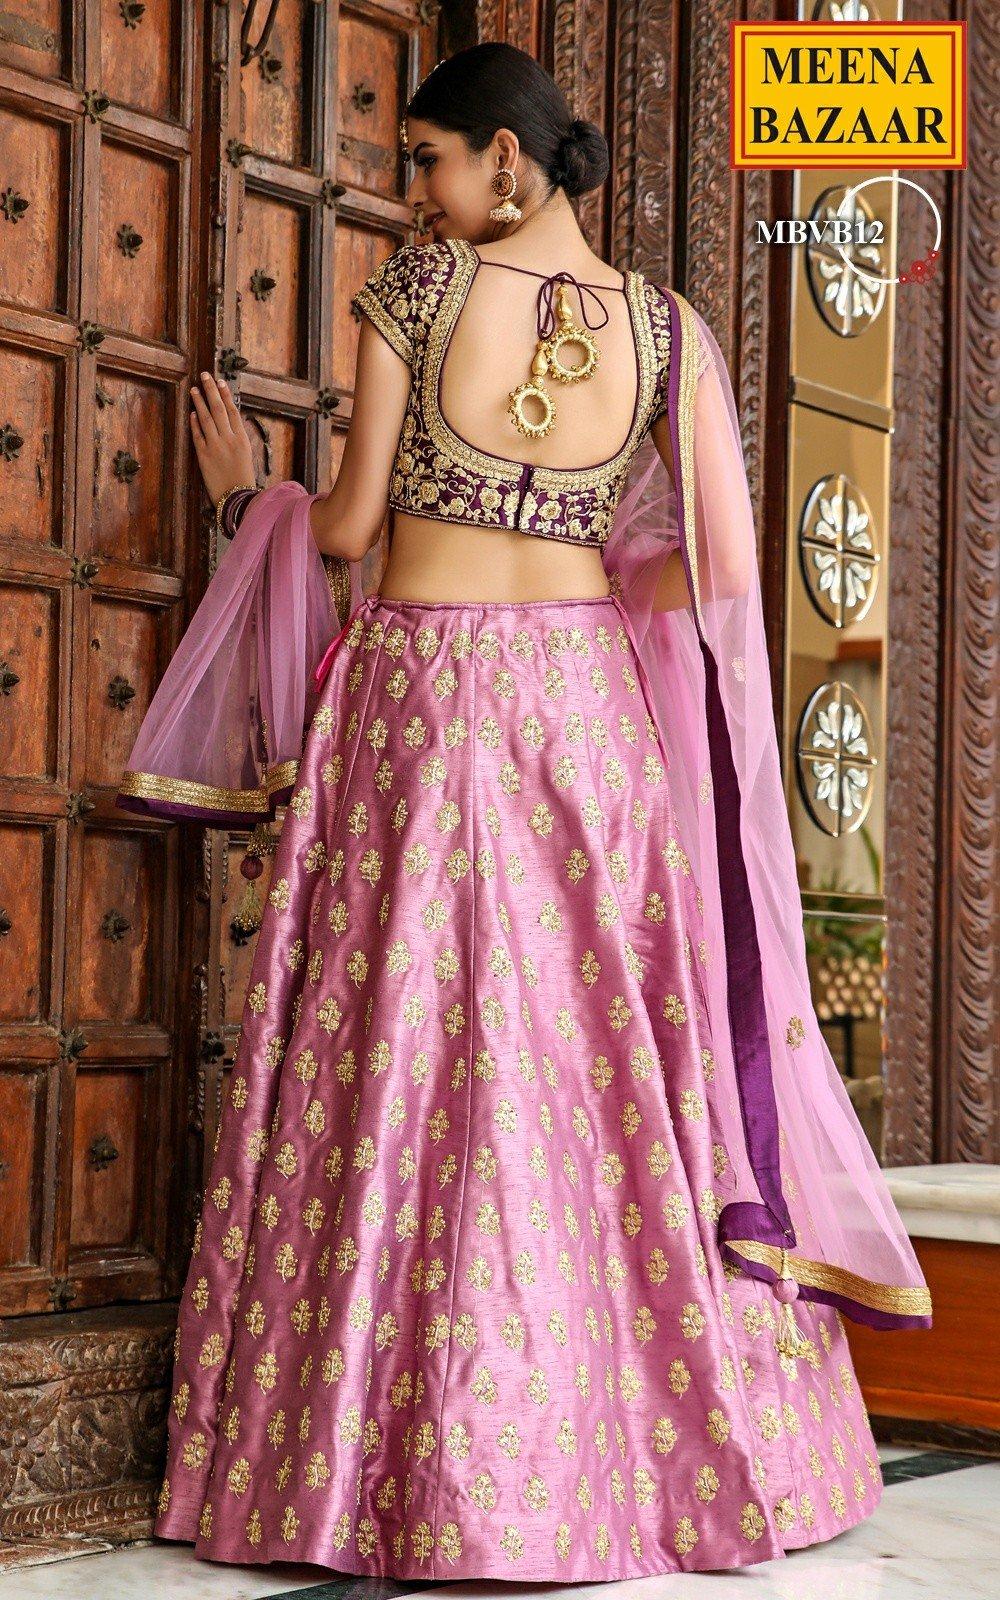 Meena Bazaar - The absolutely breath-taking collection at... | Facebook